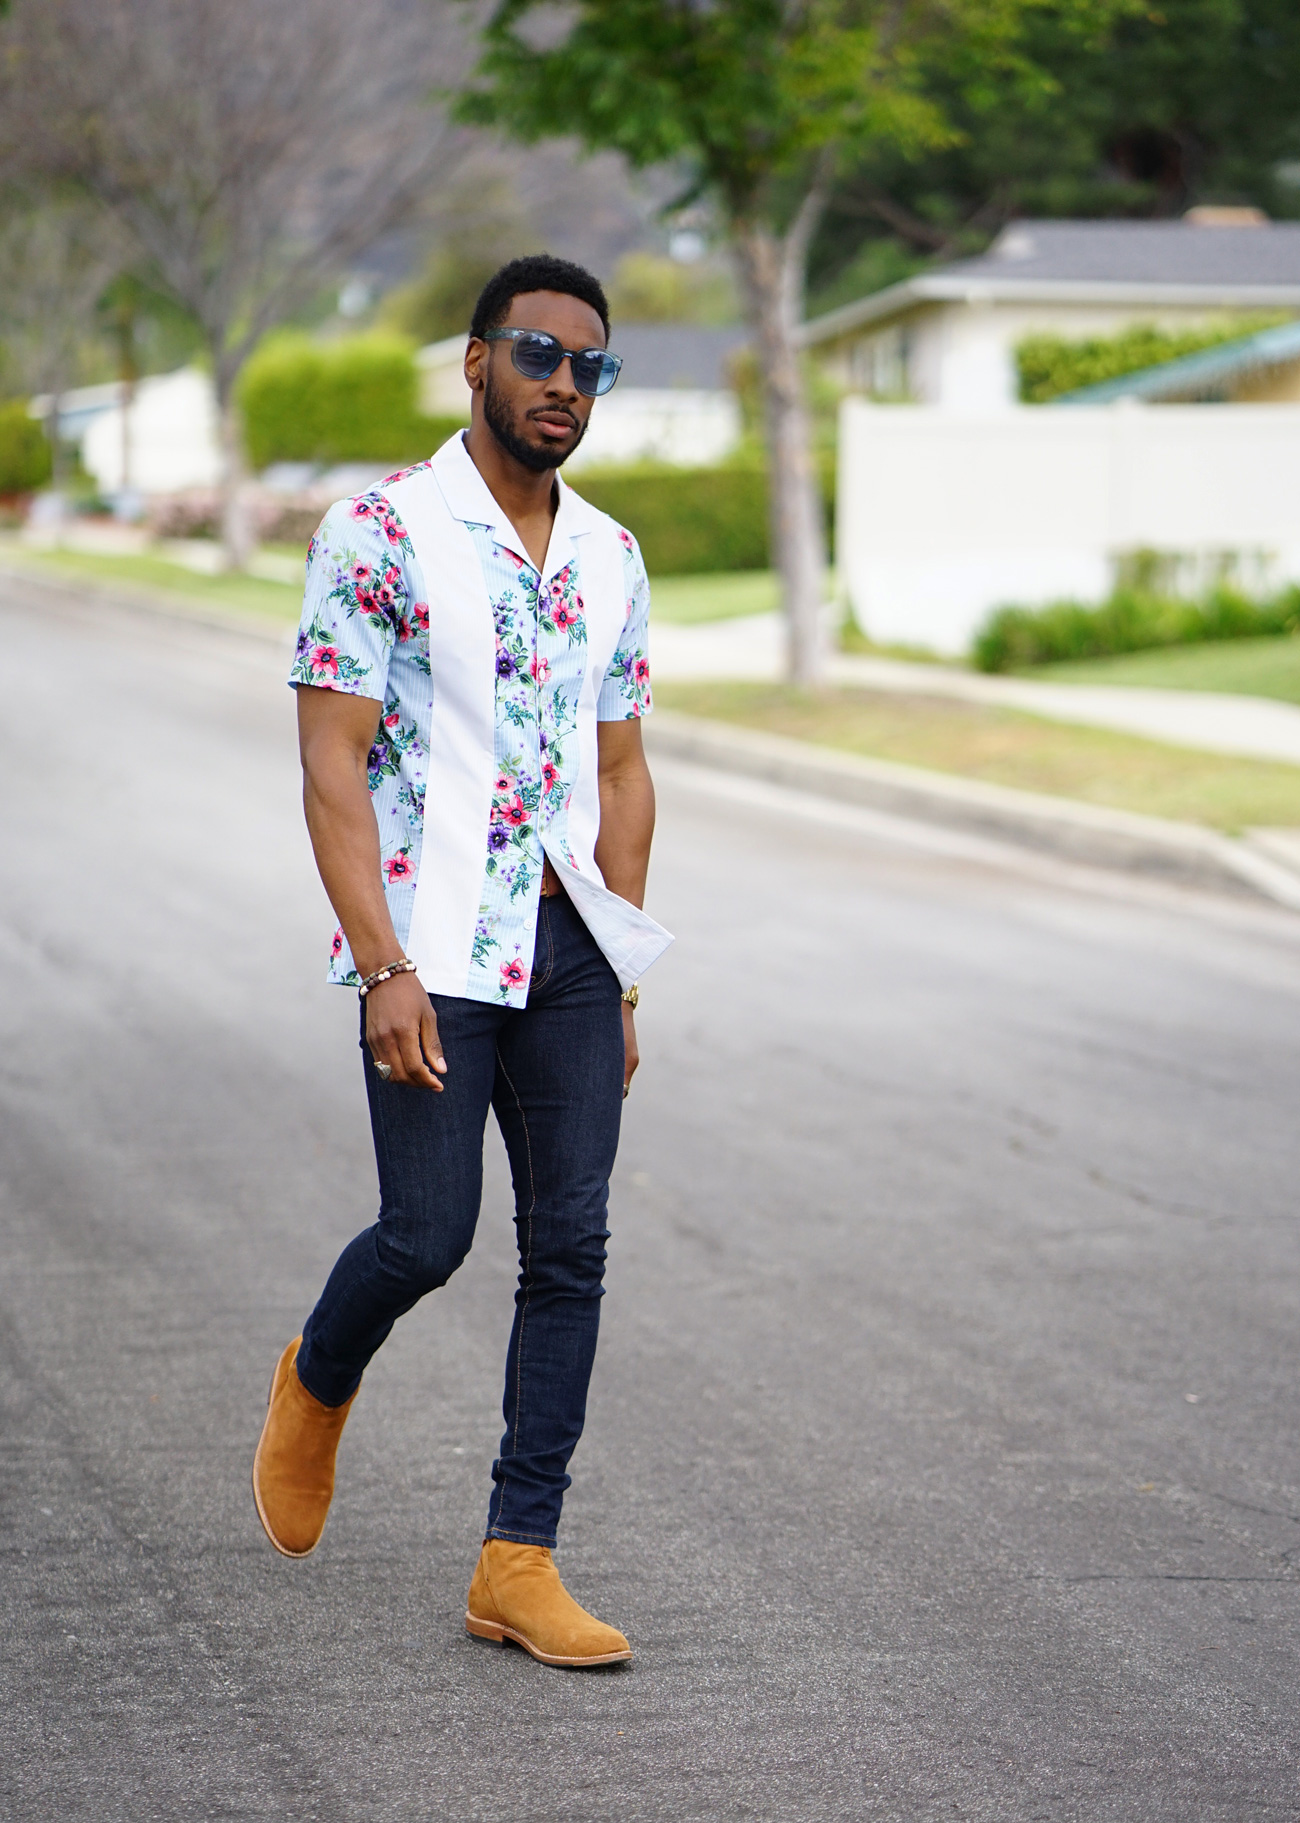 NEW BOWLING SHIRT STYLED IN CASUAL STREETWEAR – Norris Danta Ford